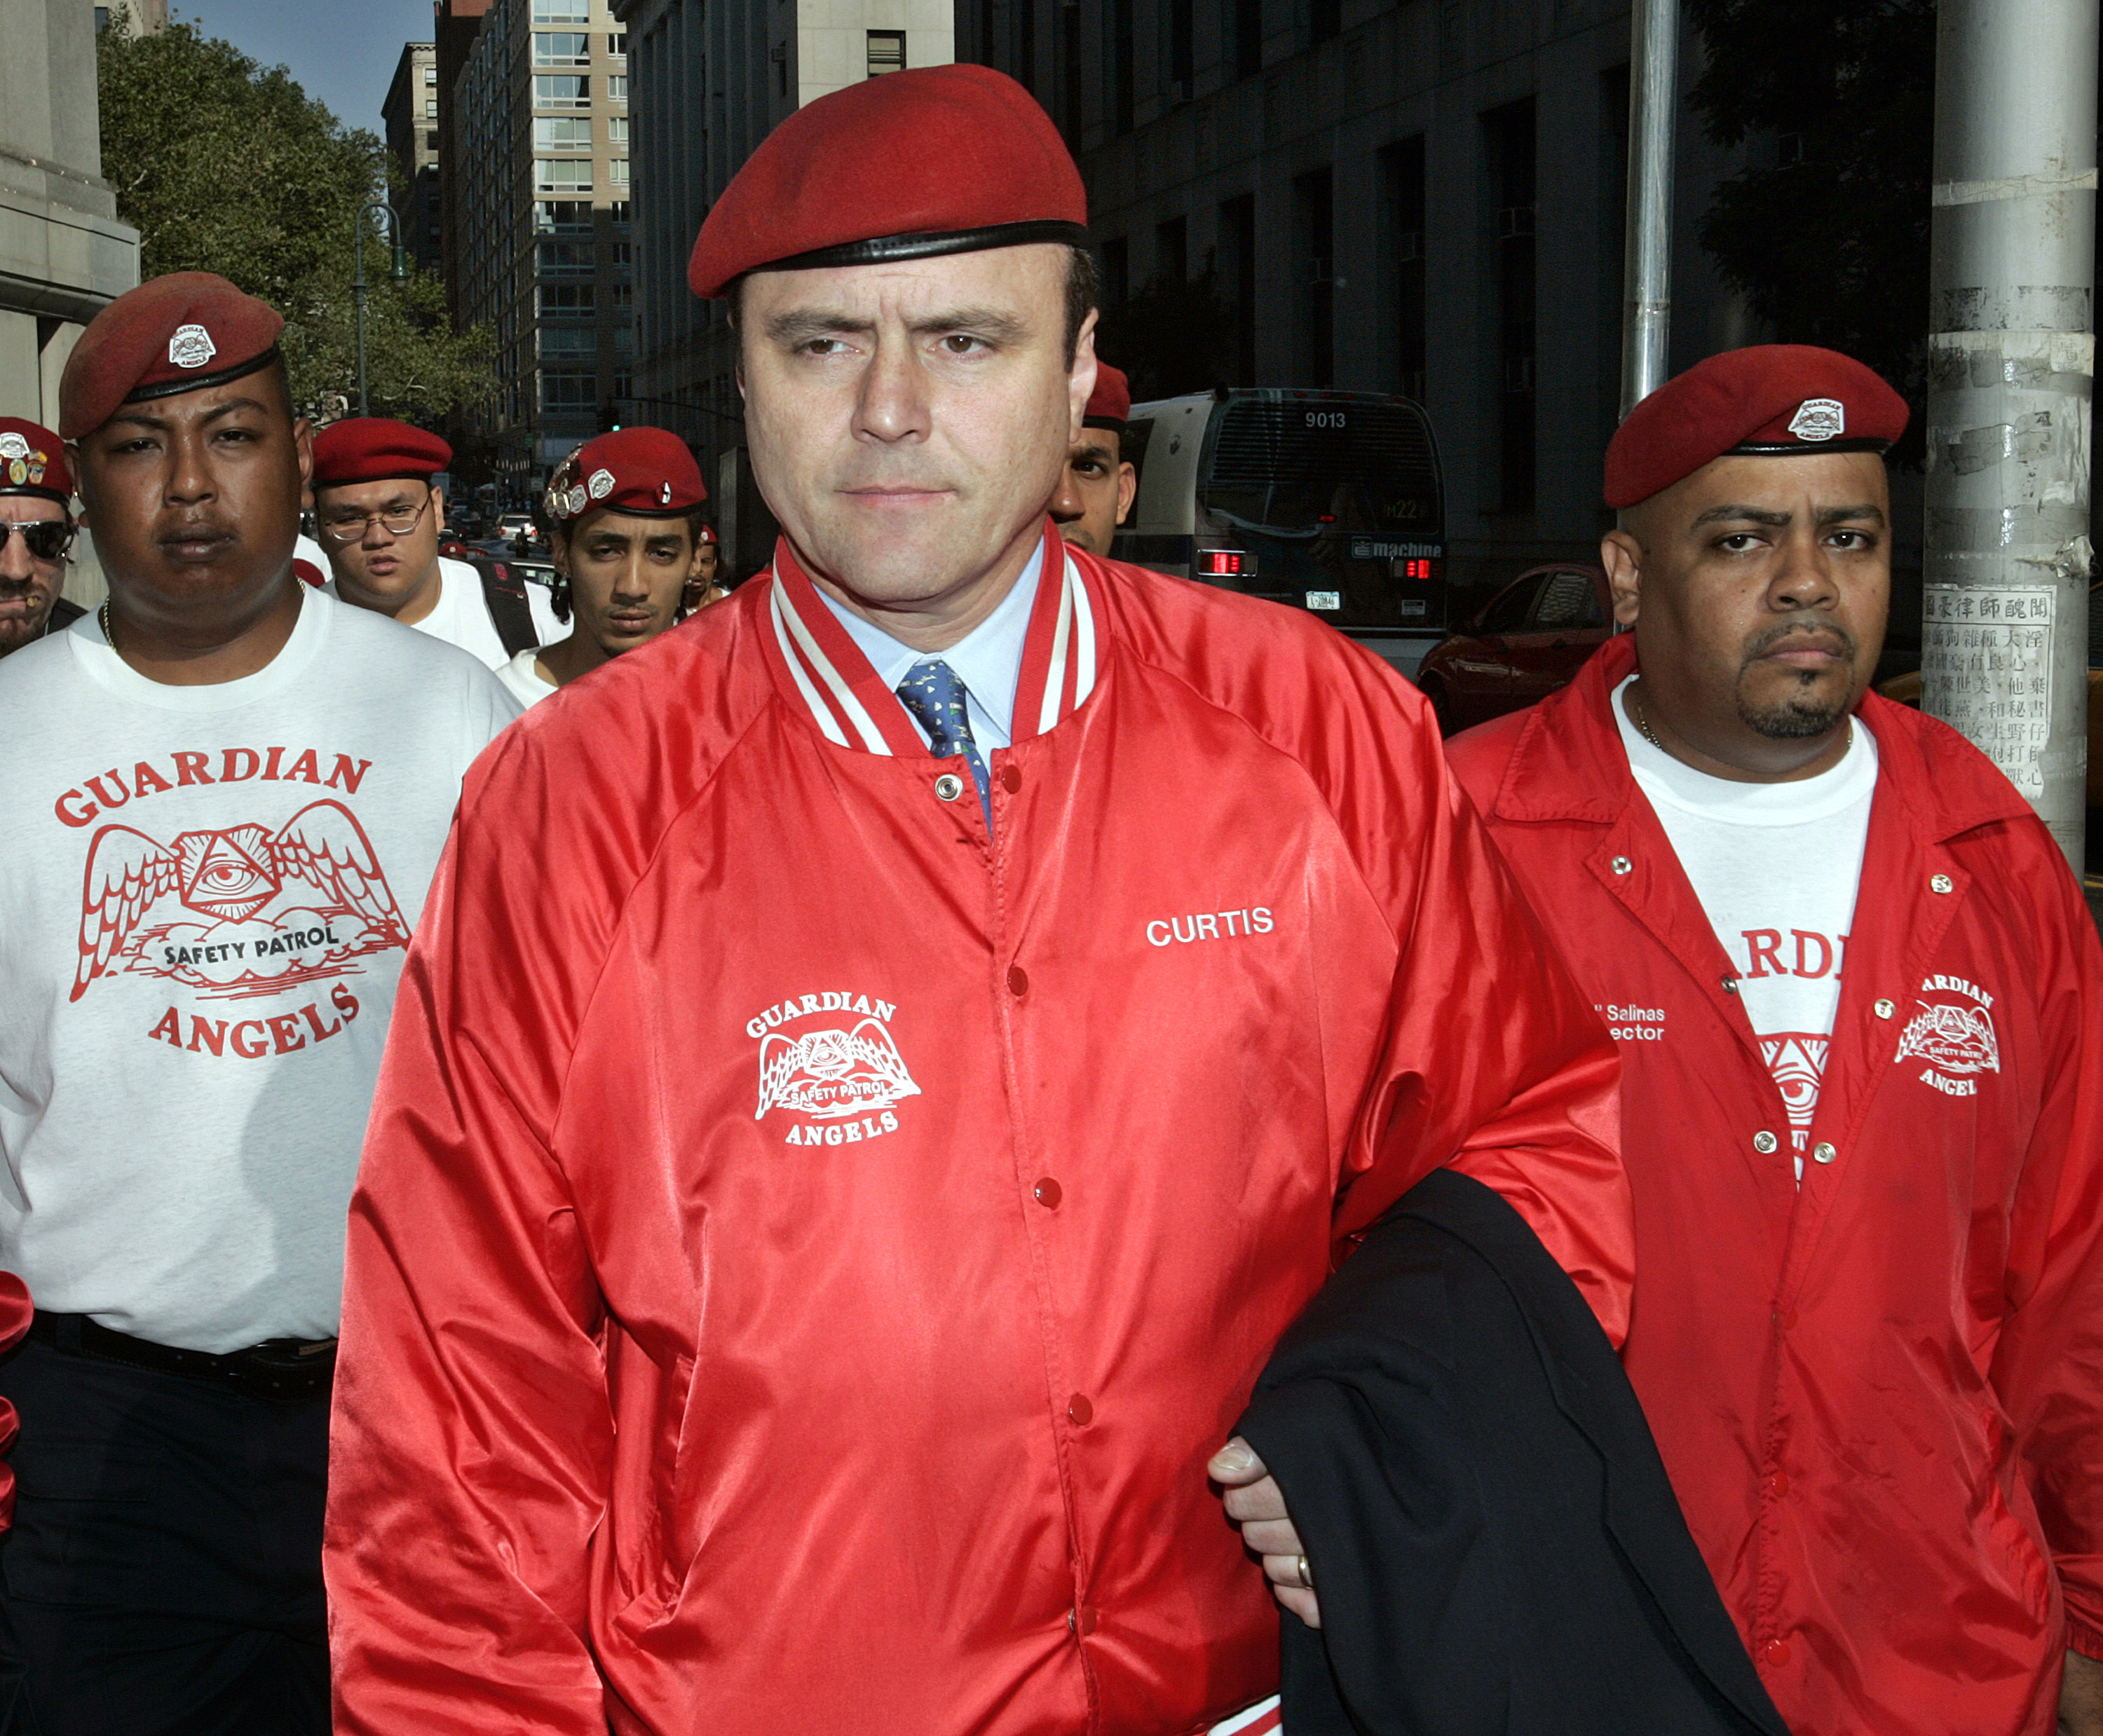 Trailed by Guardian Angels, Curtis Sliwa arrives at federal court to testify in the trial of alleged mobster John Gotti Jr. August 22, 2005 in New York City. Gotti Jr. is accused of a conspiracy to kidnap Sliwa as part of a slew of racketeering charges that could jail him for up to 30 years. (Photo by Stephen Chernin/Getty Images)